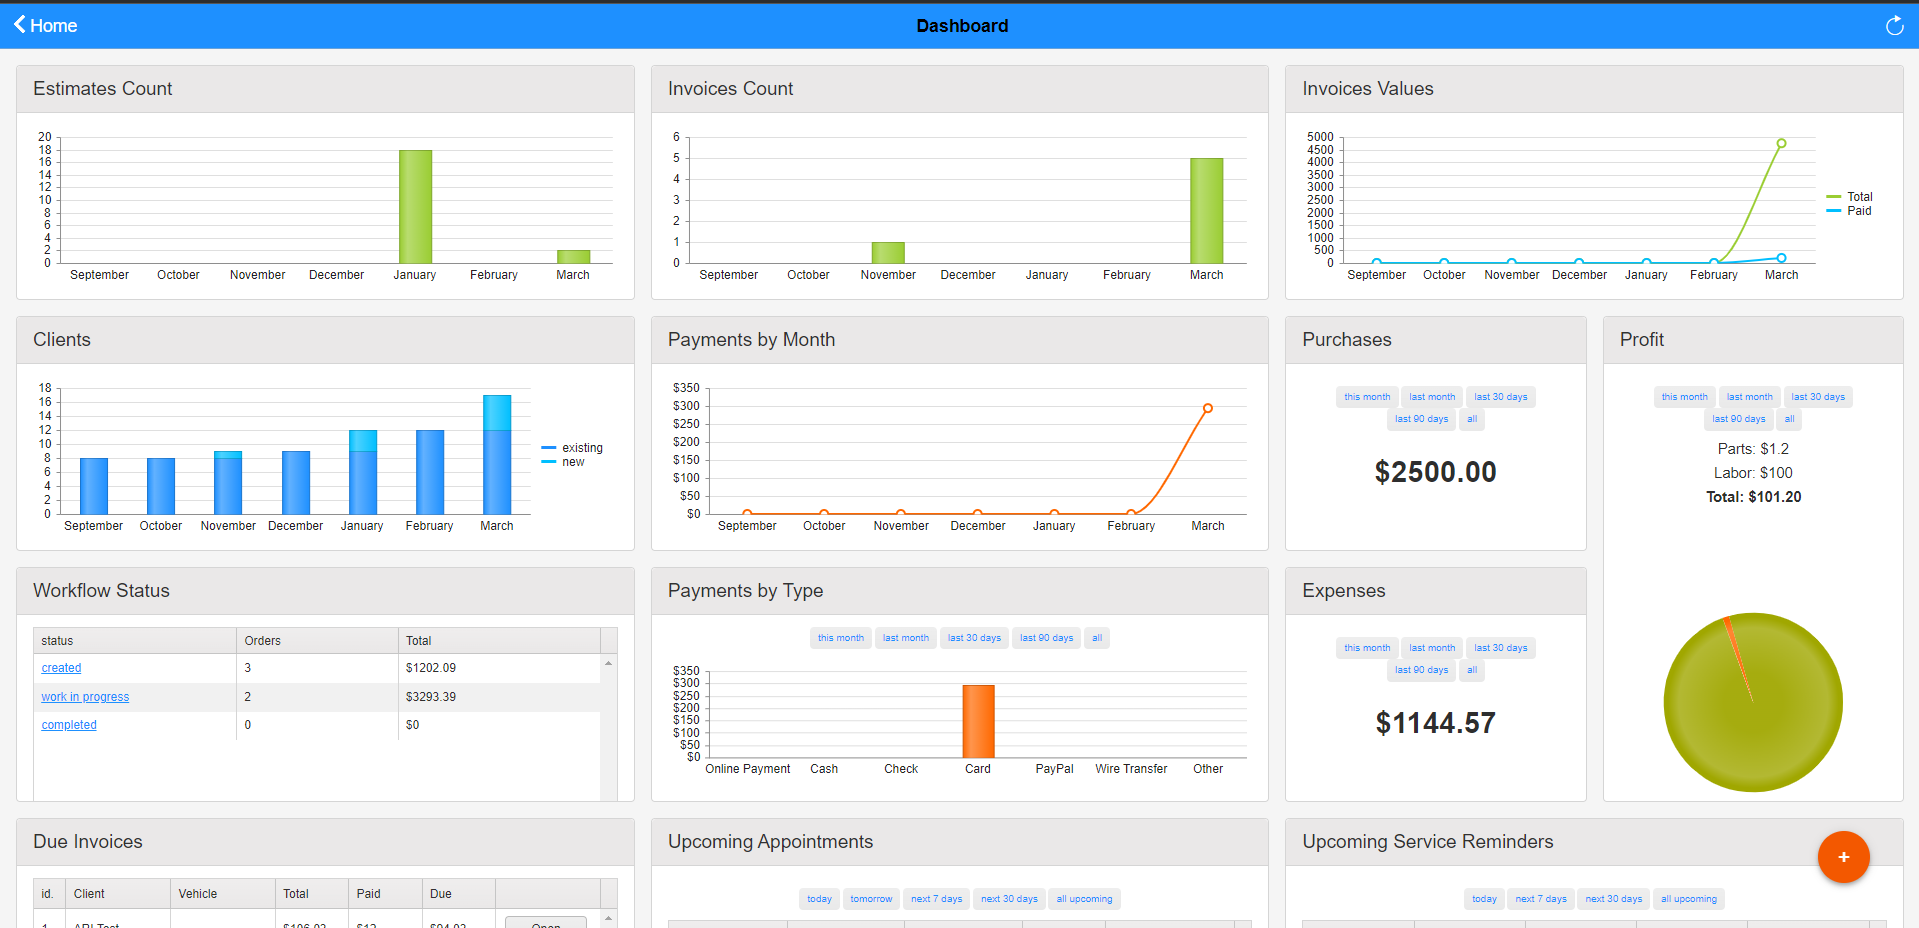 dashboard for plumbing businesses